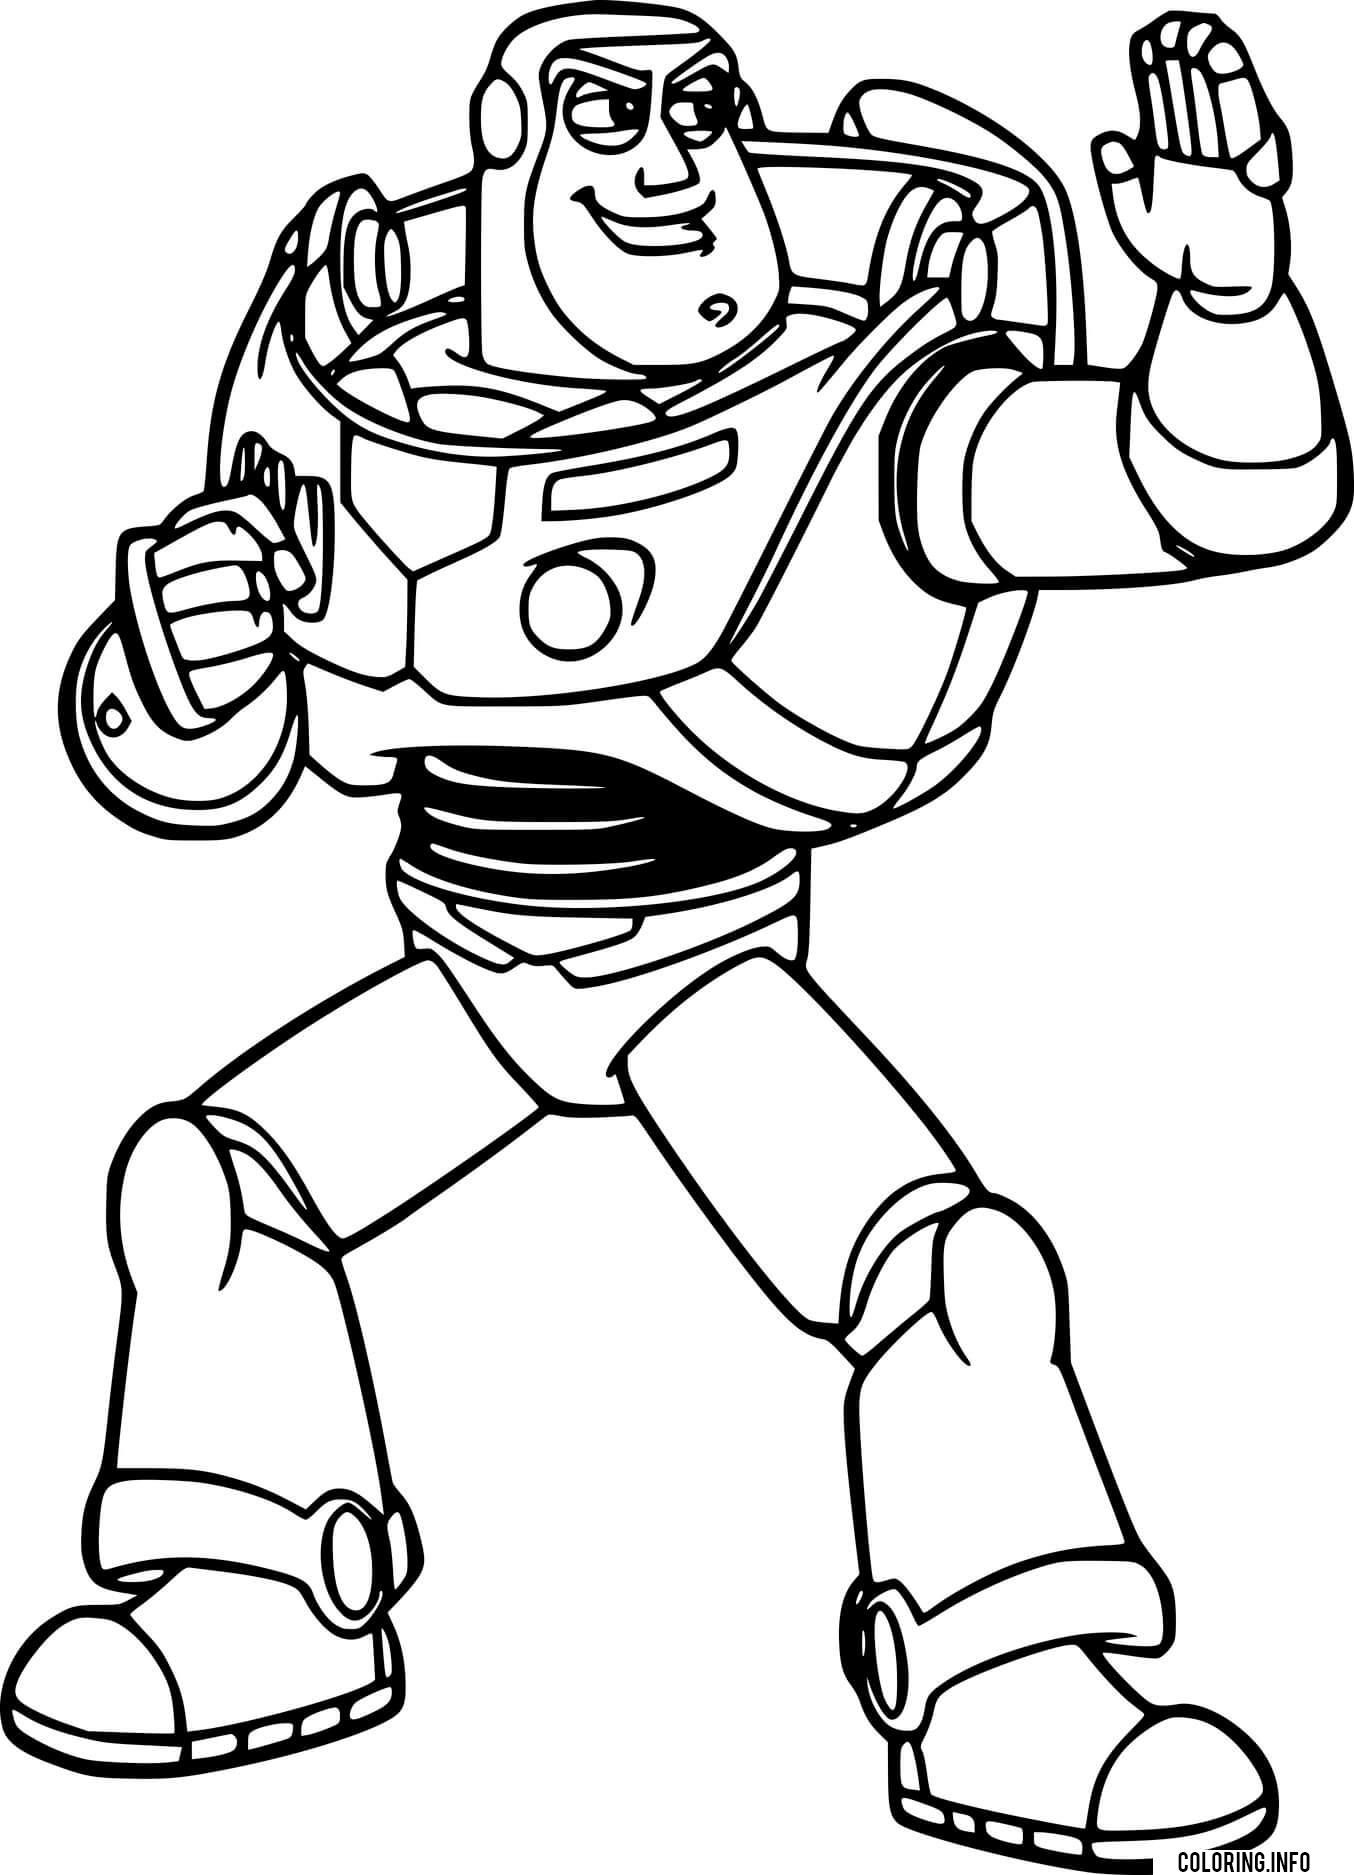 Buzz Lightyear Prepares To Fight coloring